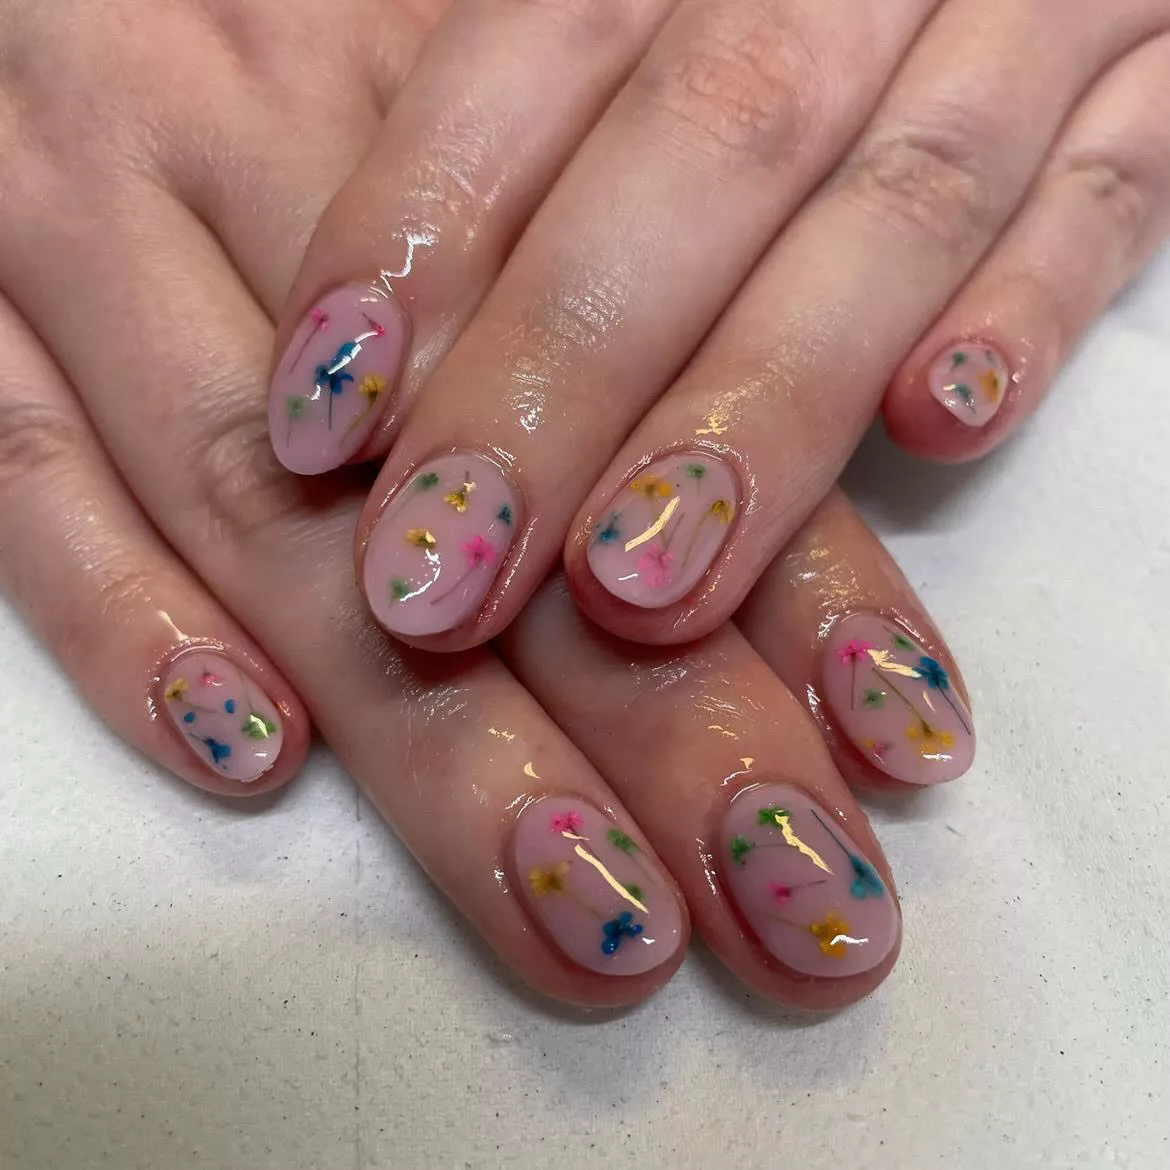 Milk bath nails with pink, blue, and yellow flowers